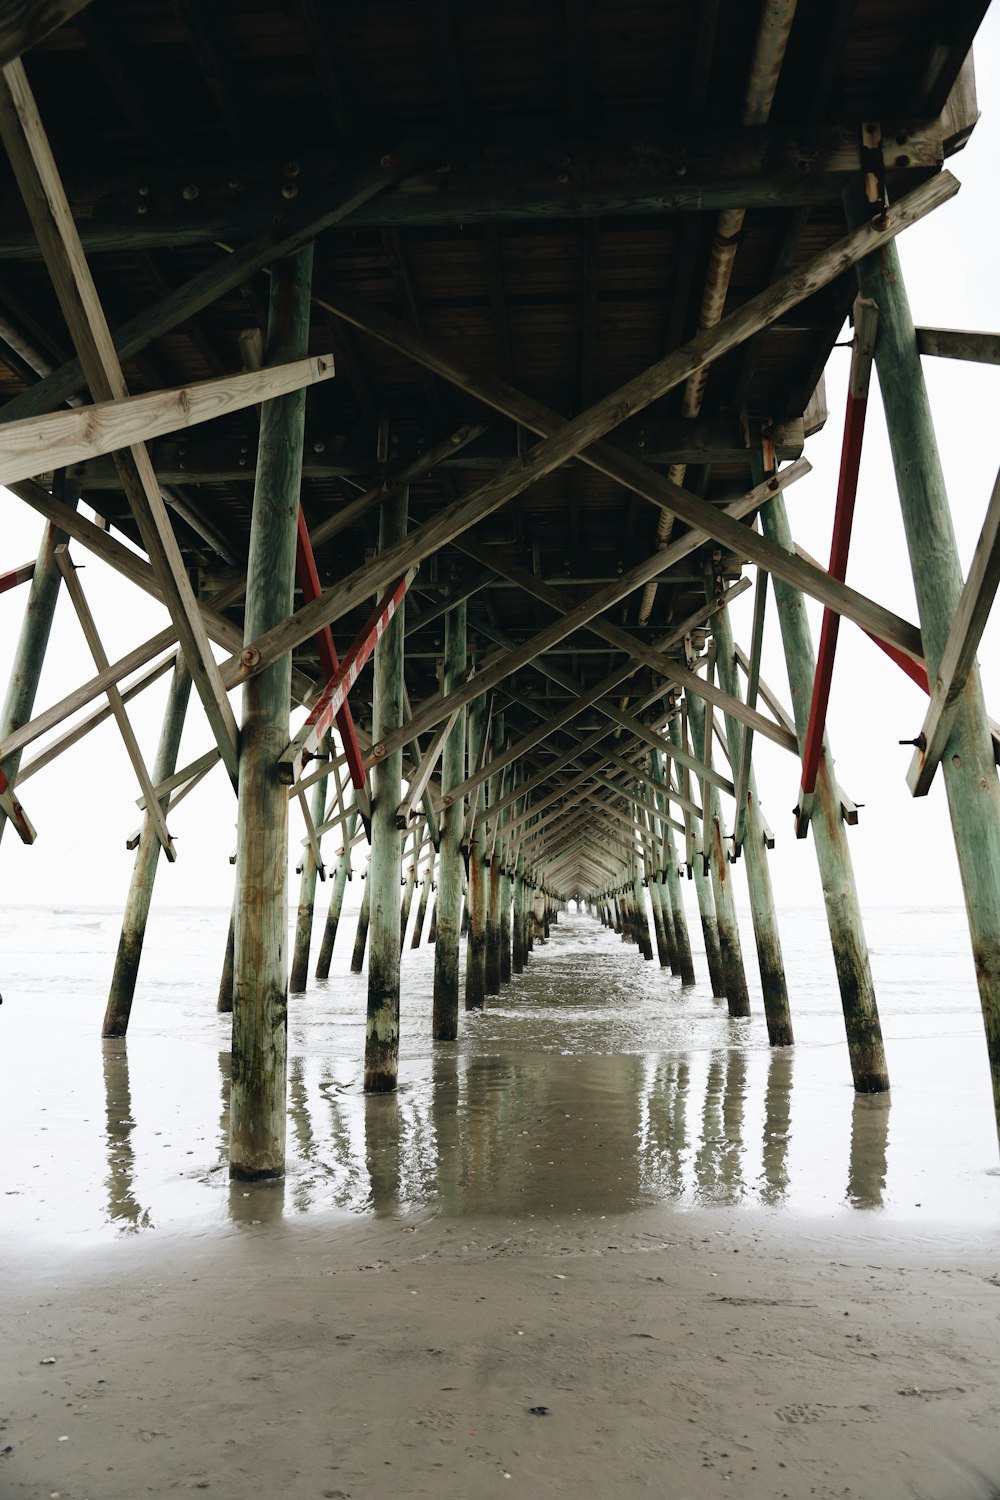 the underside of a pier with water underneath it